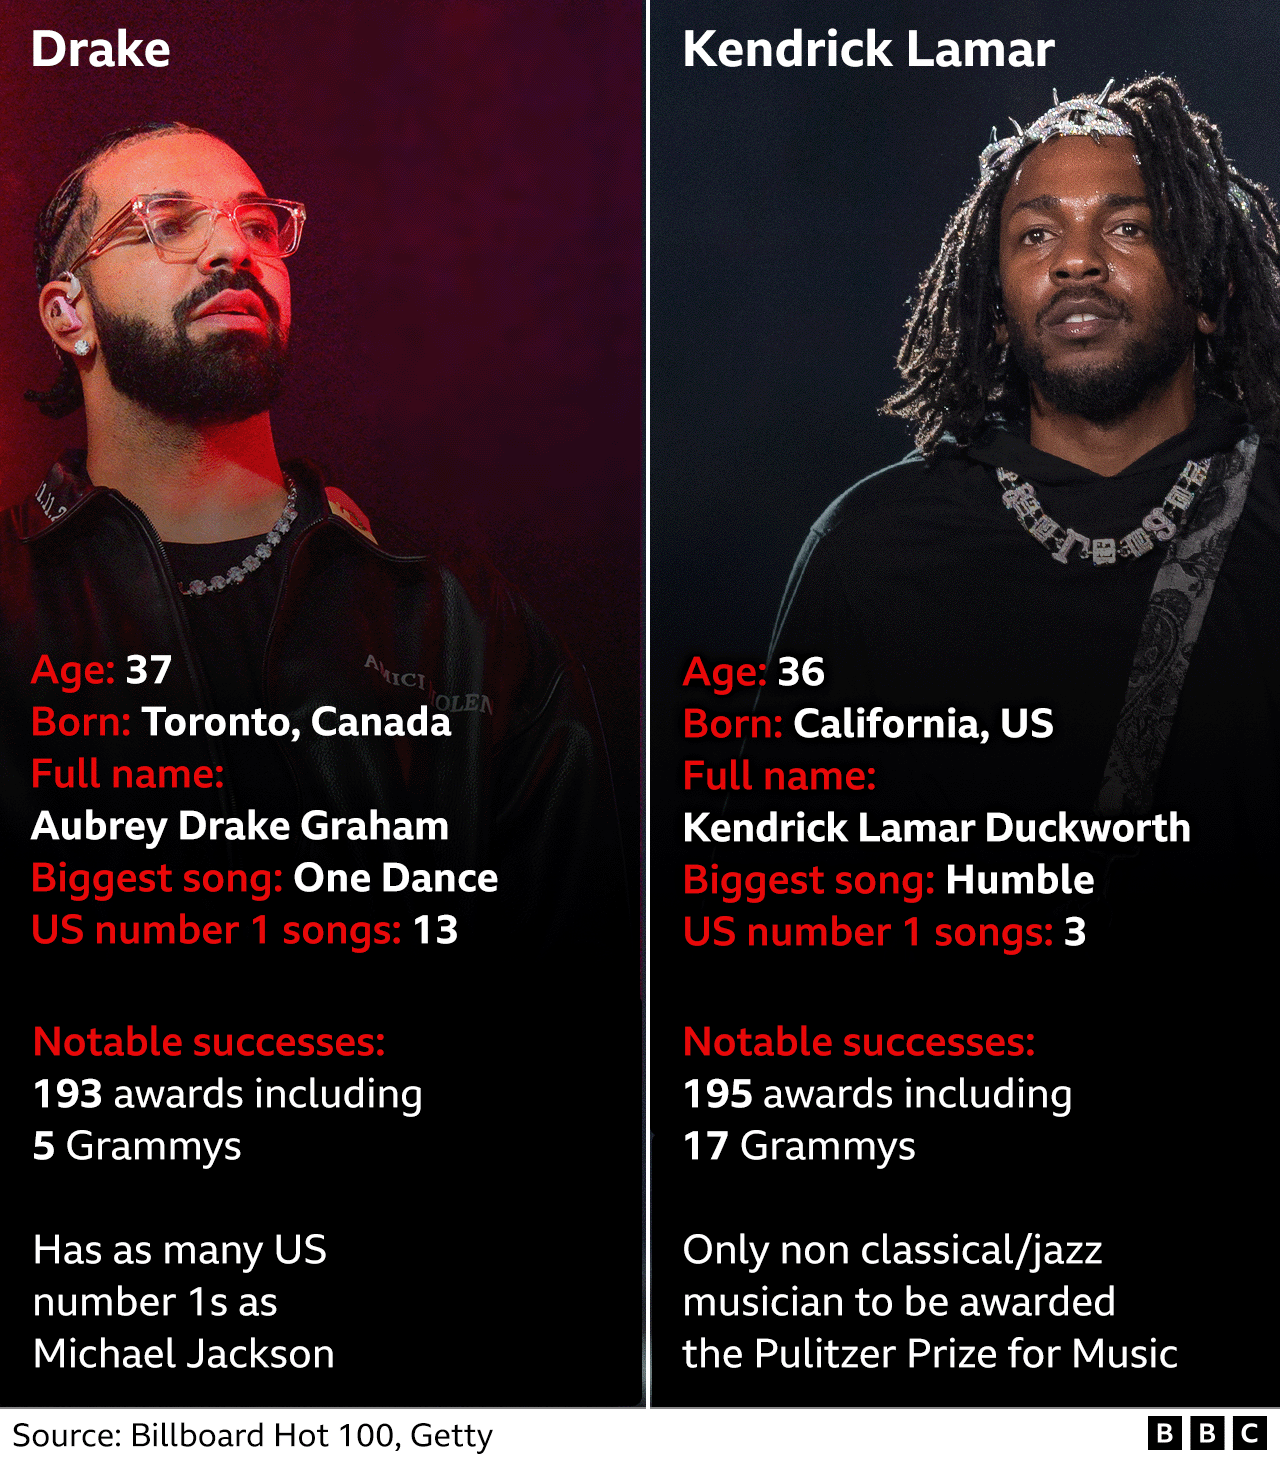 Career comparison: Drake - Age: 37; Born: Toronto; Full name: Aubrey Drake Graham; Biggest song: One Dance; US number 1 songs: 13; Notable successes: 193 awards, including five Grammys; Fact: Drake has as many US number ones as Michael Jackson. Career comparison: Kendrick Lamar - Age: 36; Born: California; Full name: Kendrick Lamar Duckworth; Biggest song: Humble; US number 1 songs: 3; Notable successes: 195 awards, including 17 Grammys; Fact: Kendrick Lamar is the only non-classical/jazz musician to be awarded the Pulitzer Prize for Music.